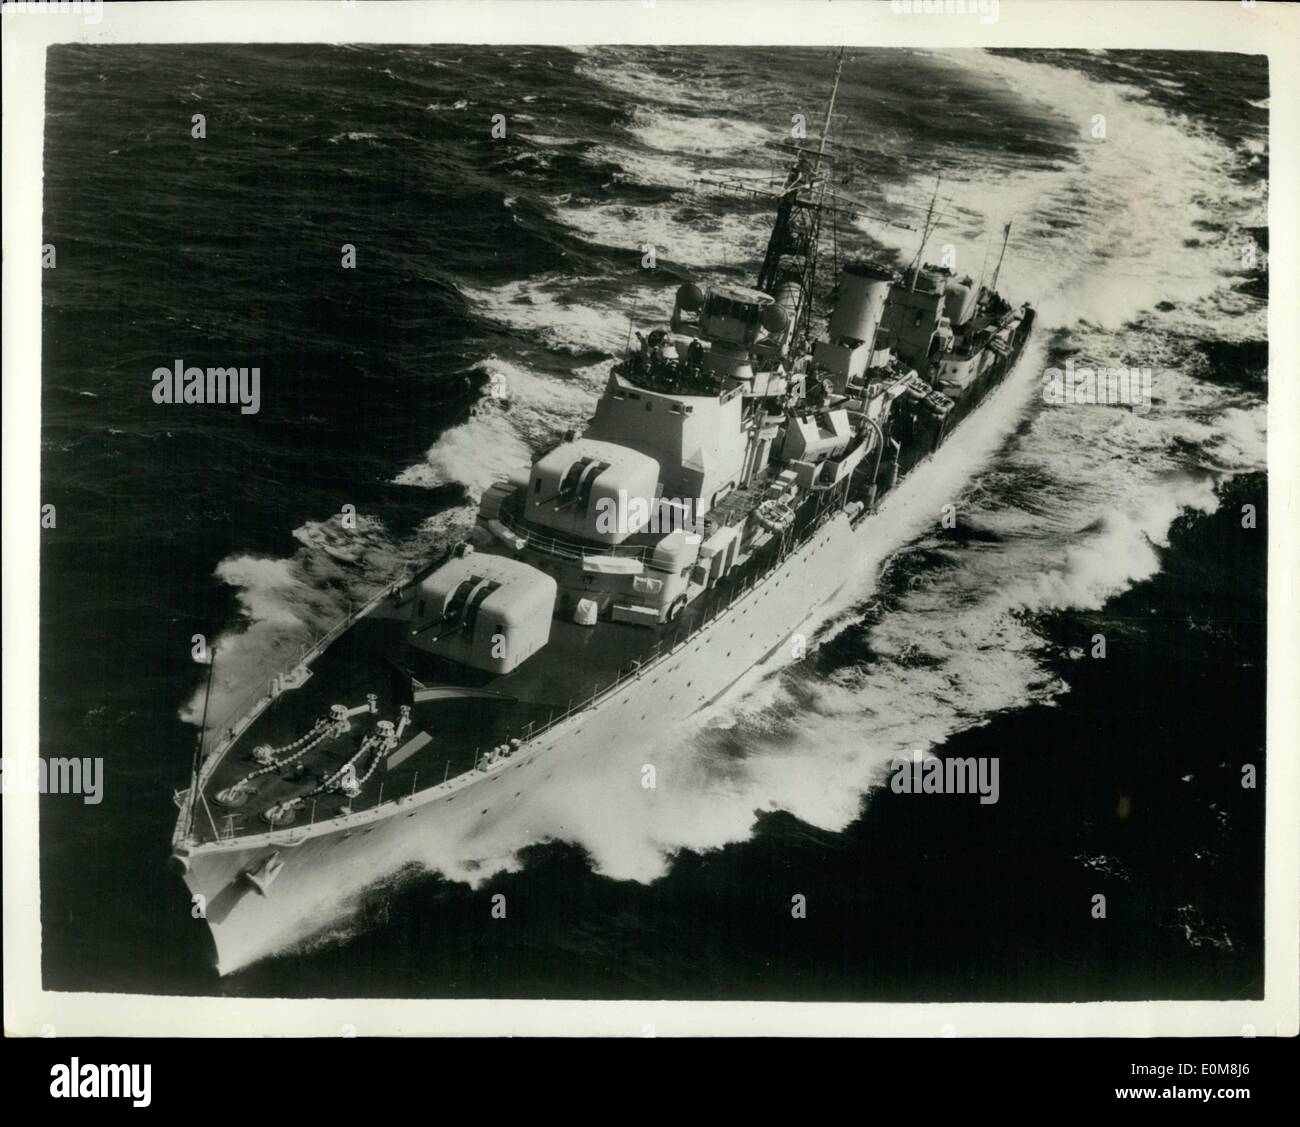 Dec. 12, 1953 - Dashing Daring: H.M.S. Daring, first of eight '' Daring'' class destroyers and the largest in the Royal Navy, has been taking part in maneuvers with the British Mediterrenean Fleet off Malta. Daring has a complement of over 300 men, needed because of the large amount of highly technical equipment she carries. She is of all welded construction, is powered by steam turbines of advanced design and has a displacement of 2,610 long tons (3,500 long tons full load). Her main armament is made up of six 4.5 in. radar-controlled guns. Photo shows H.M Stock Photo